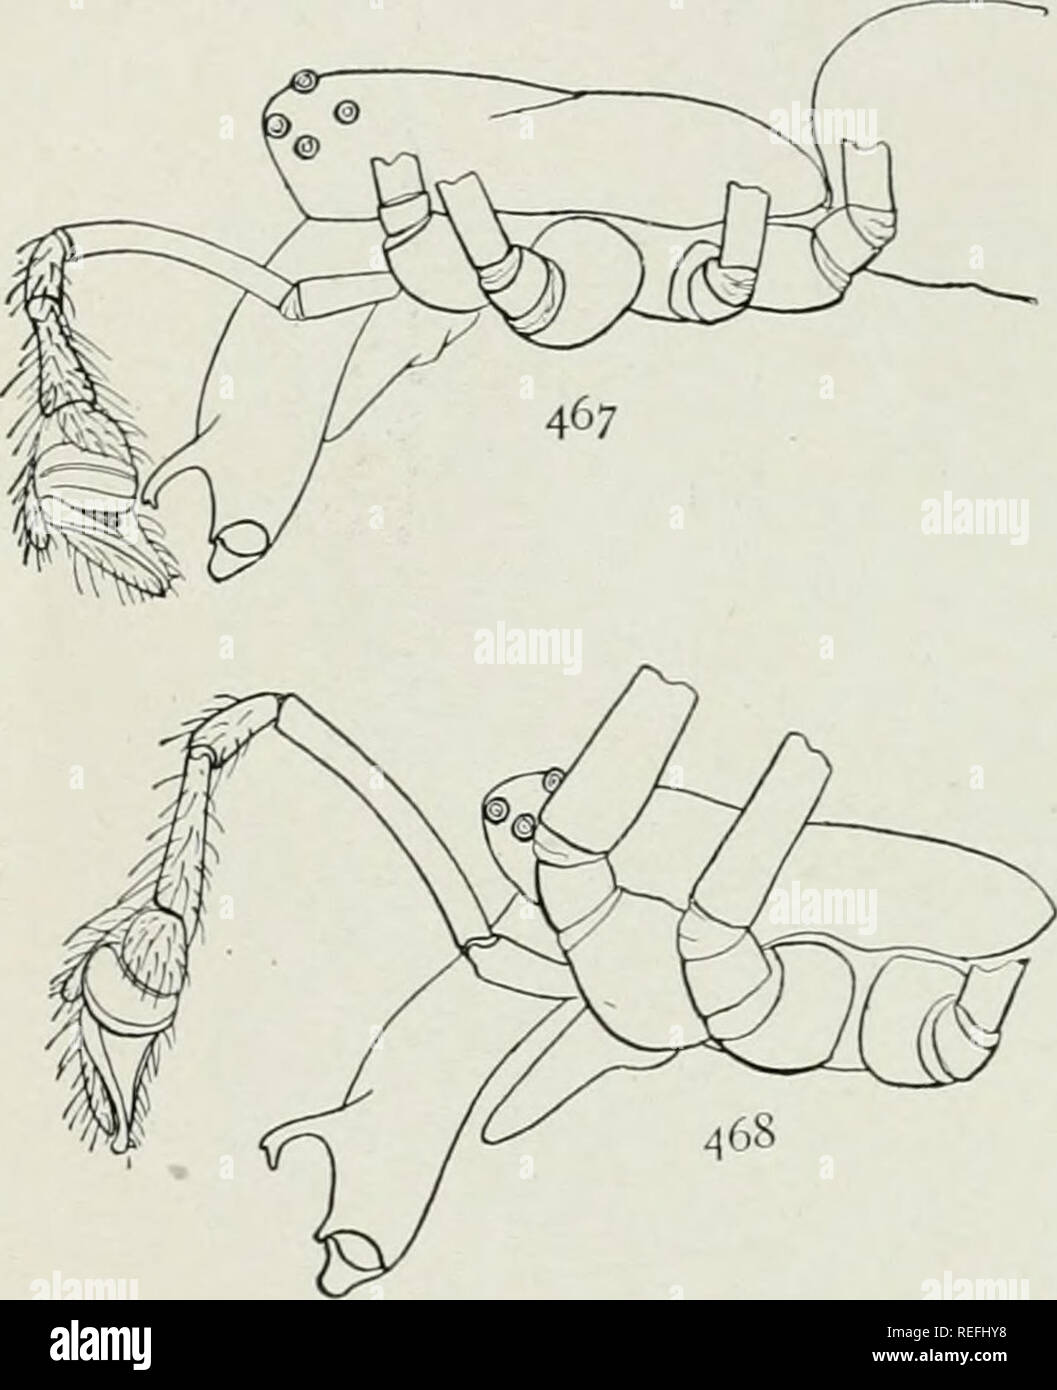 . The common spiders of the United States. Spiders. 204 THE COMMON SPIDERS times as long as the cephalothorax. The first legs are about seven times as long as the cephalothorax. The upper row of eyes is a little curved, so that the lateral pairs of eyes are as far apart as the middle ones (fig. 467). The general color is light yellow. The abdomen is silvery white, with some indistinct gray markings along the middle, and dark stripes on the under side. In the males the mandibles (fig. 467) are short compared with the other species, and are about two-thirds as long as the cephalothorax, and the  Stock Photo